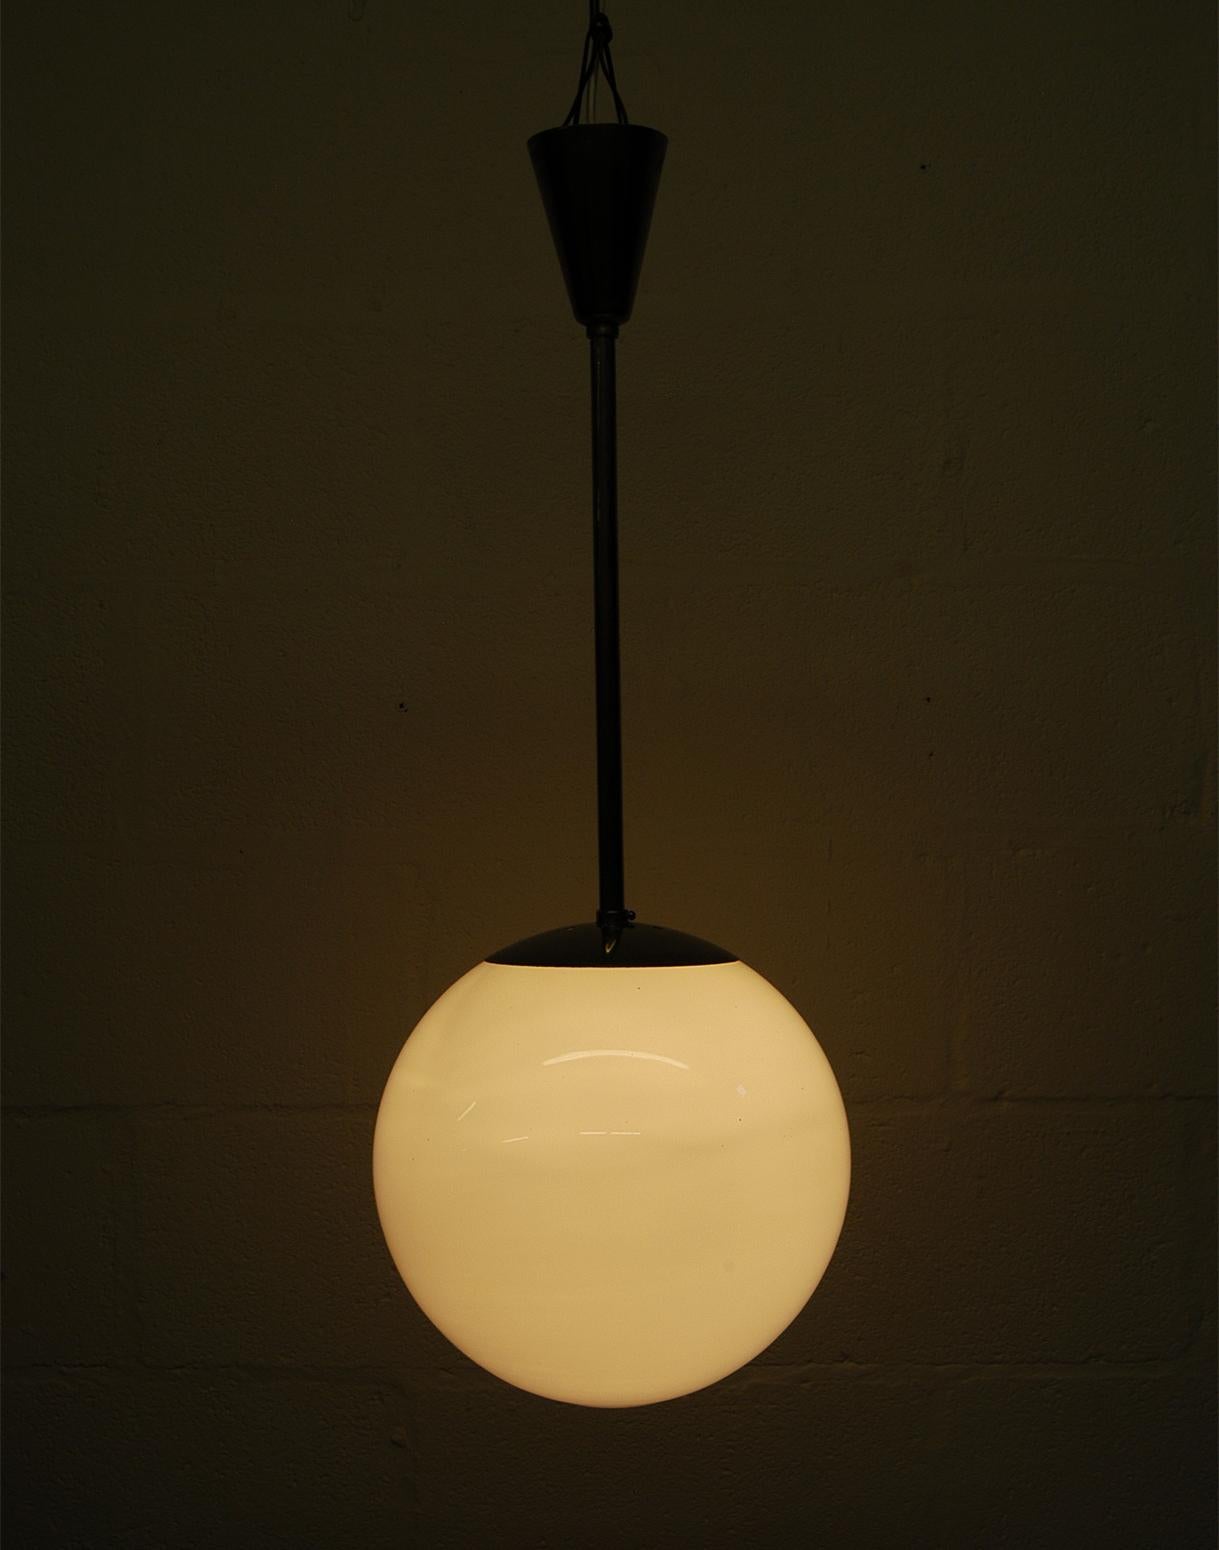 20th Century Rare 1930s Bauhaus Glass Ball Pendant Light by A.B Read for Troughton & Young For Sale